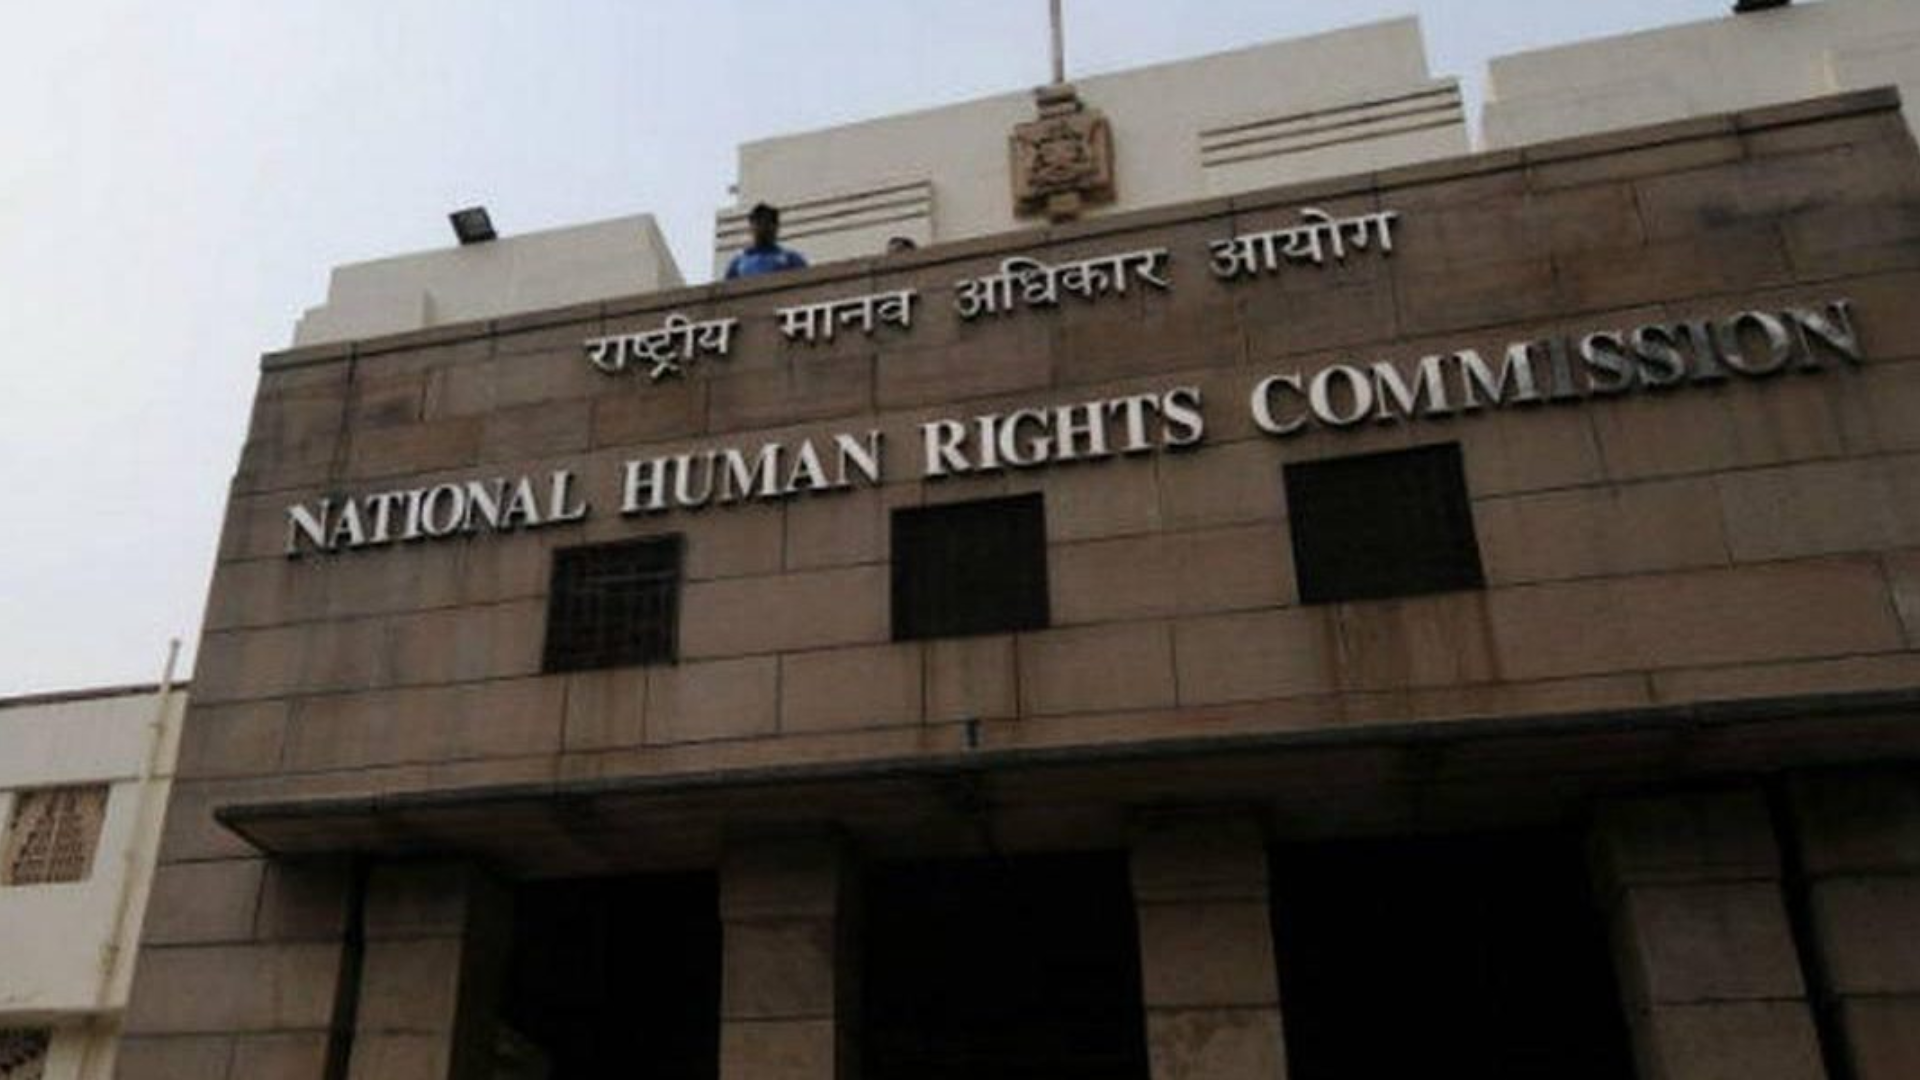 NHRC India Fosters Human Rights Across Asia Pacific Region